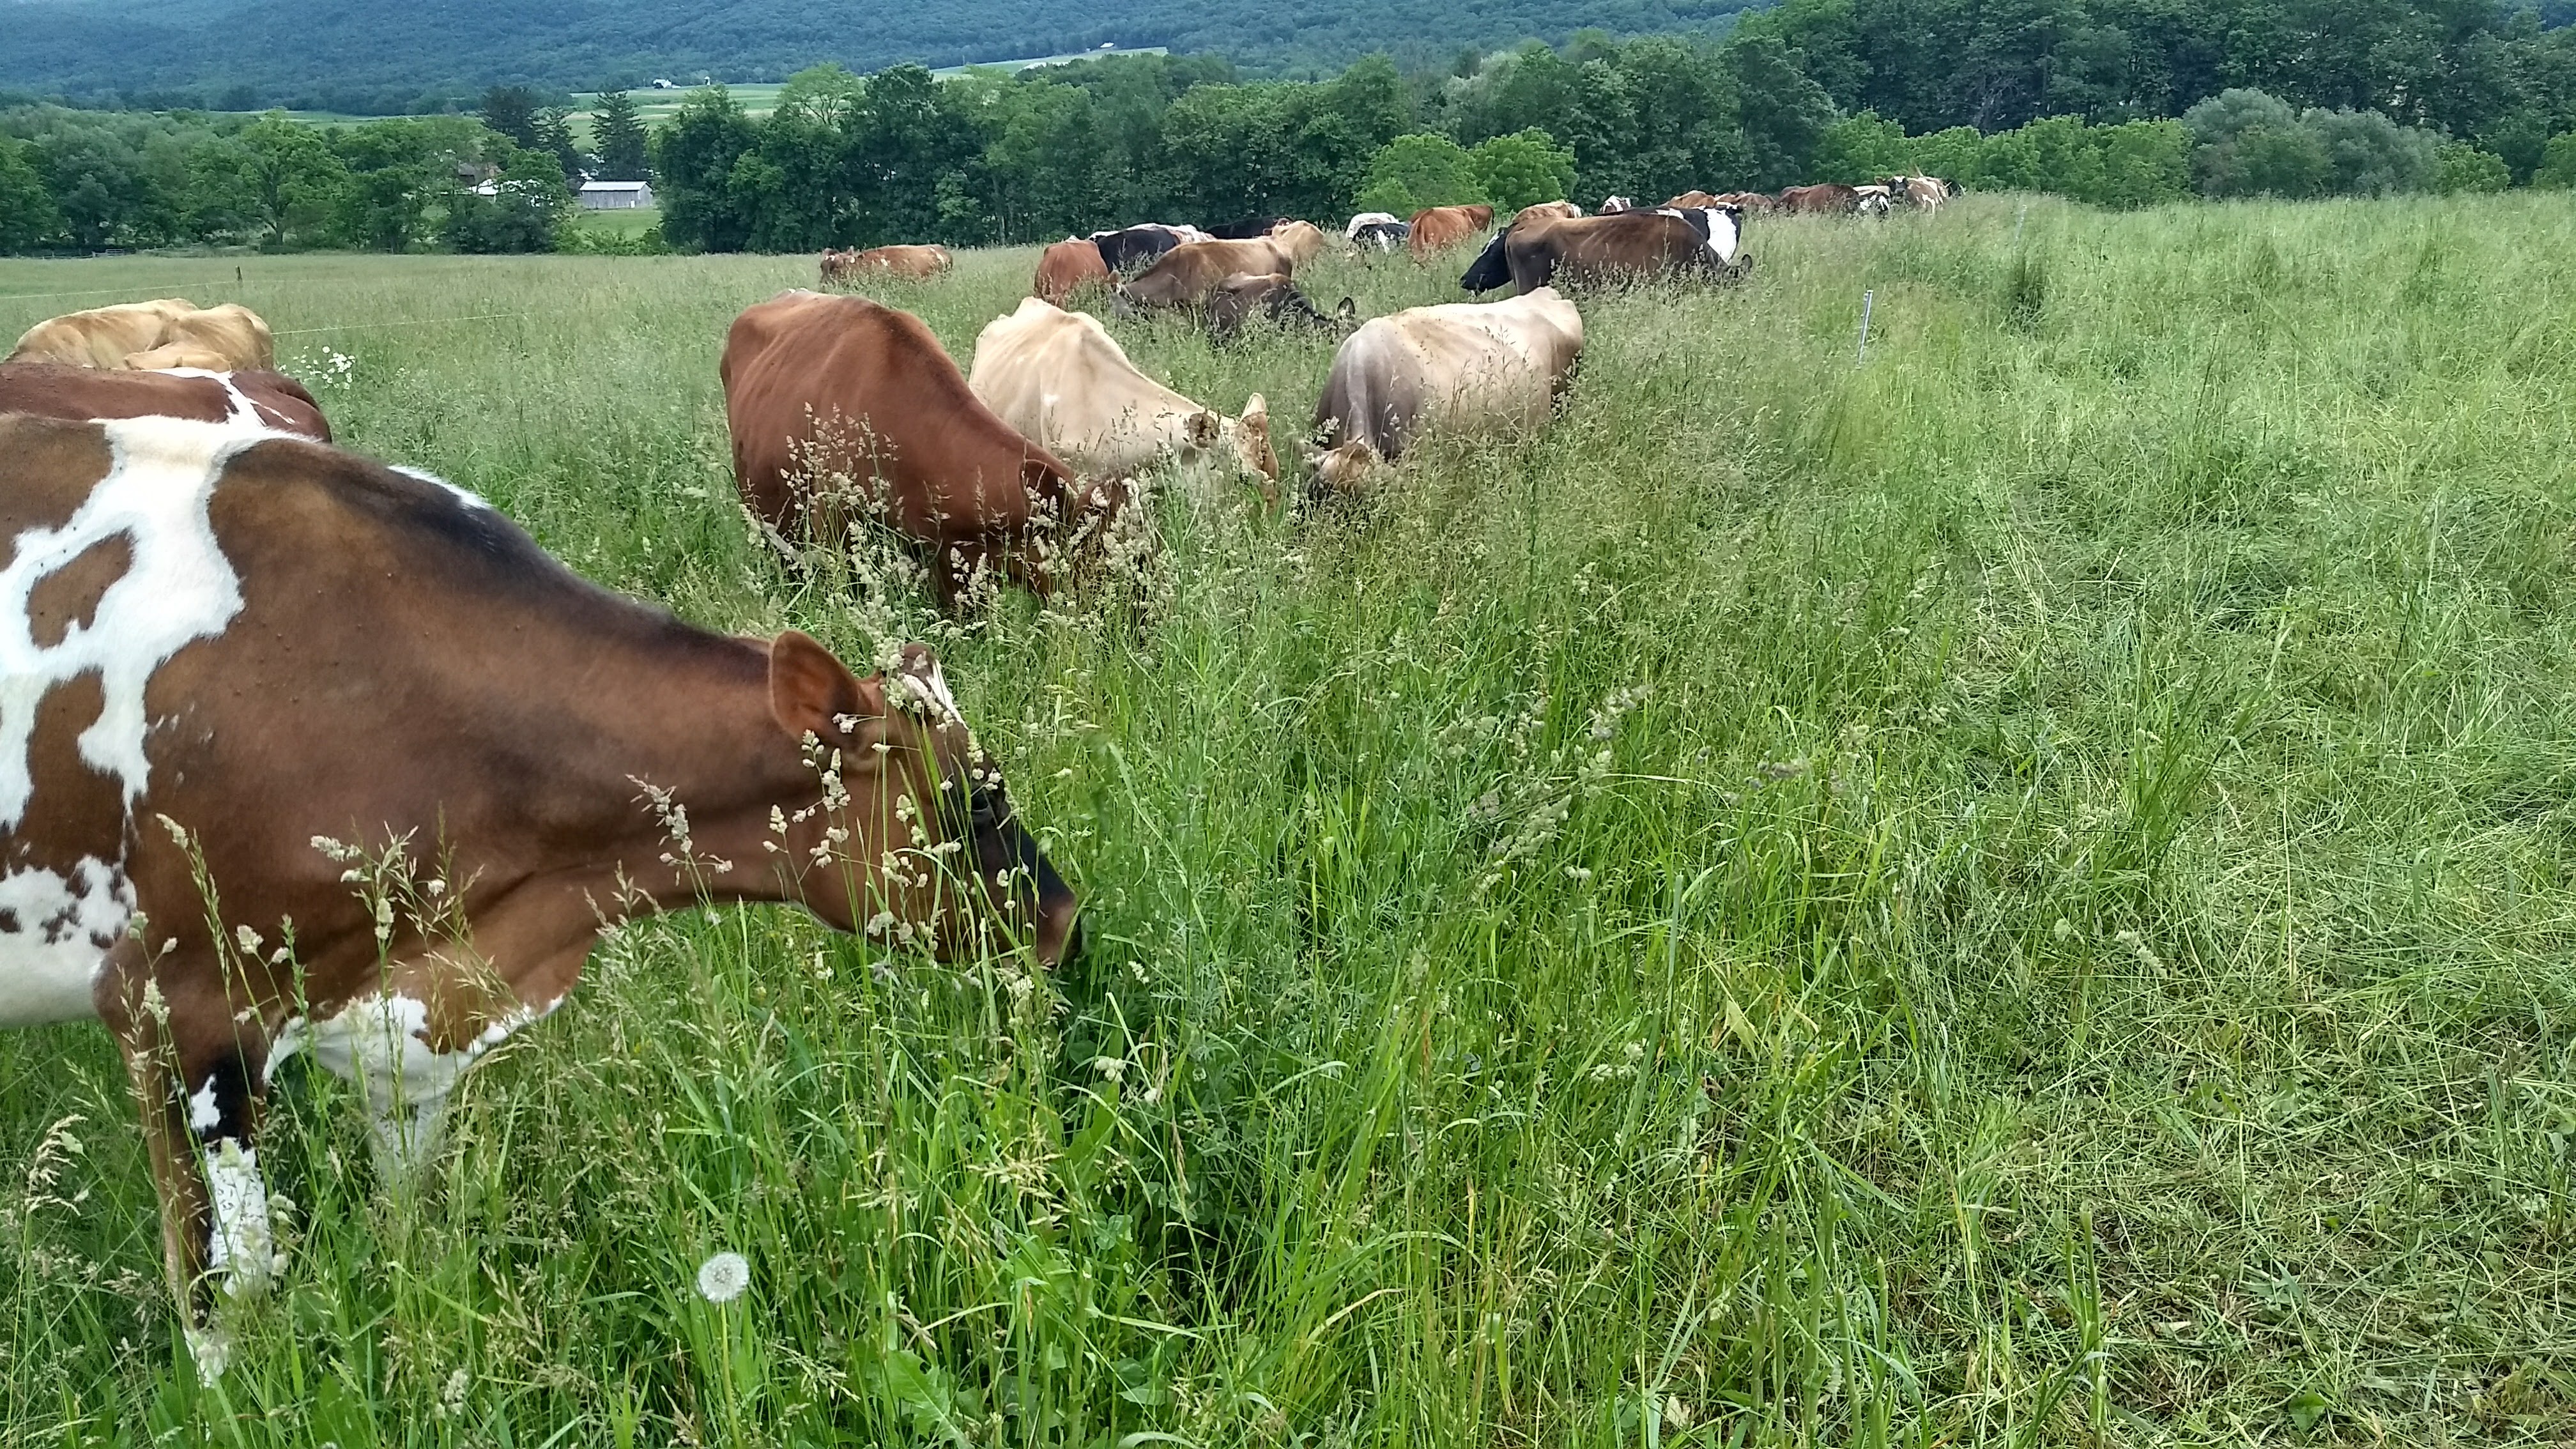 Our cows enjoying the full pasture